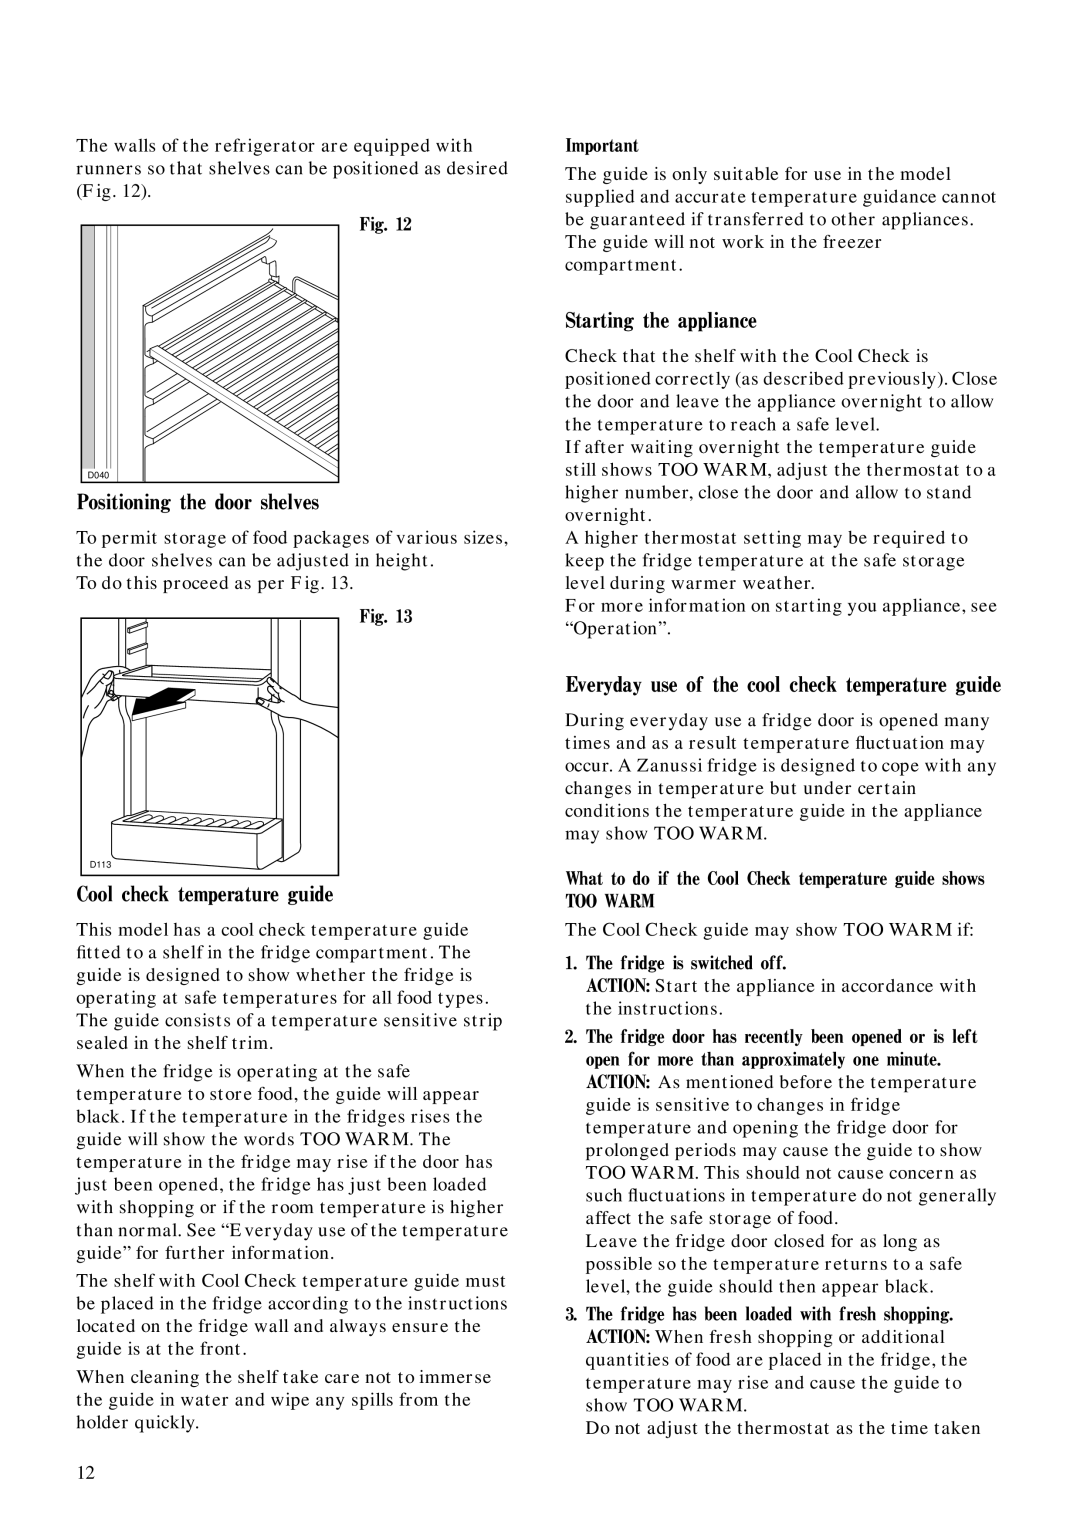 Zanussi ZFC 66/14 manual Positioning the door shelves, Cool check temperature guide, Starting the appliance 